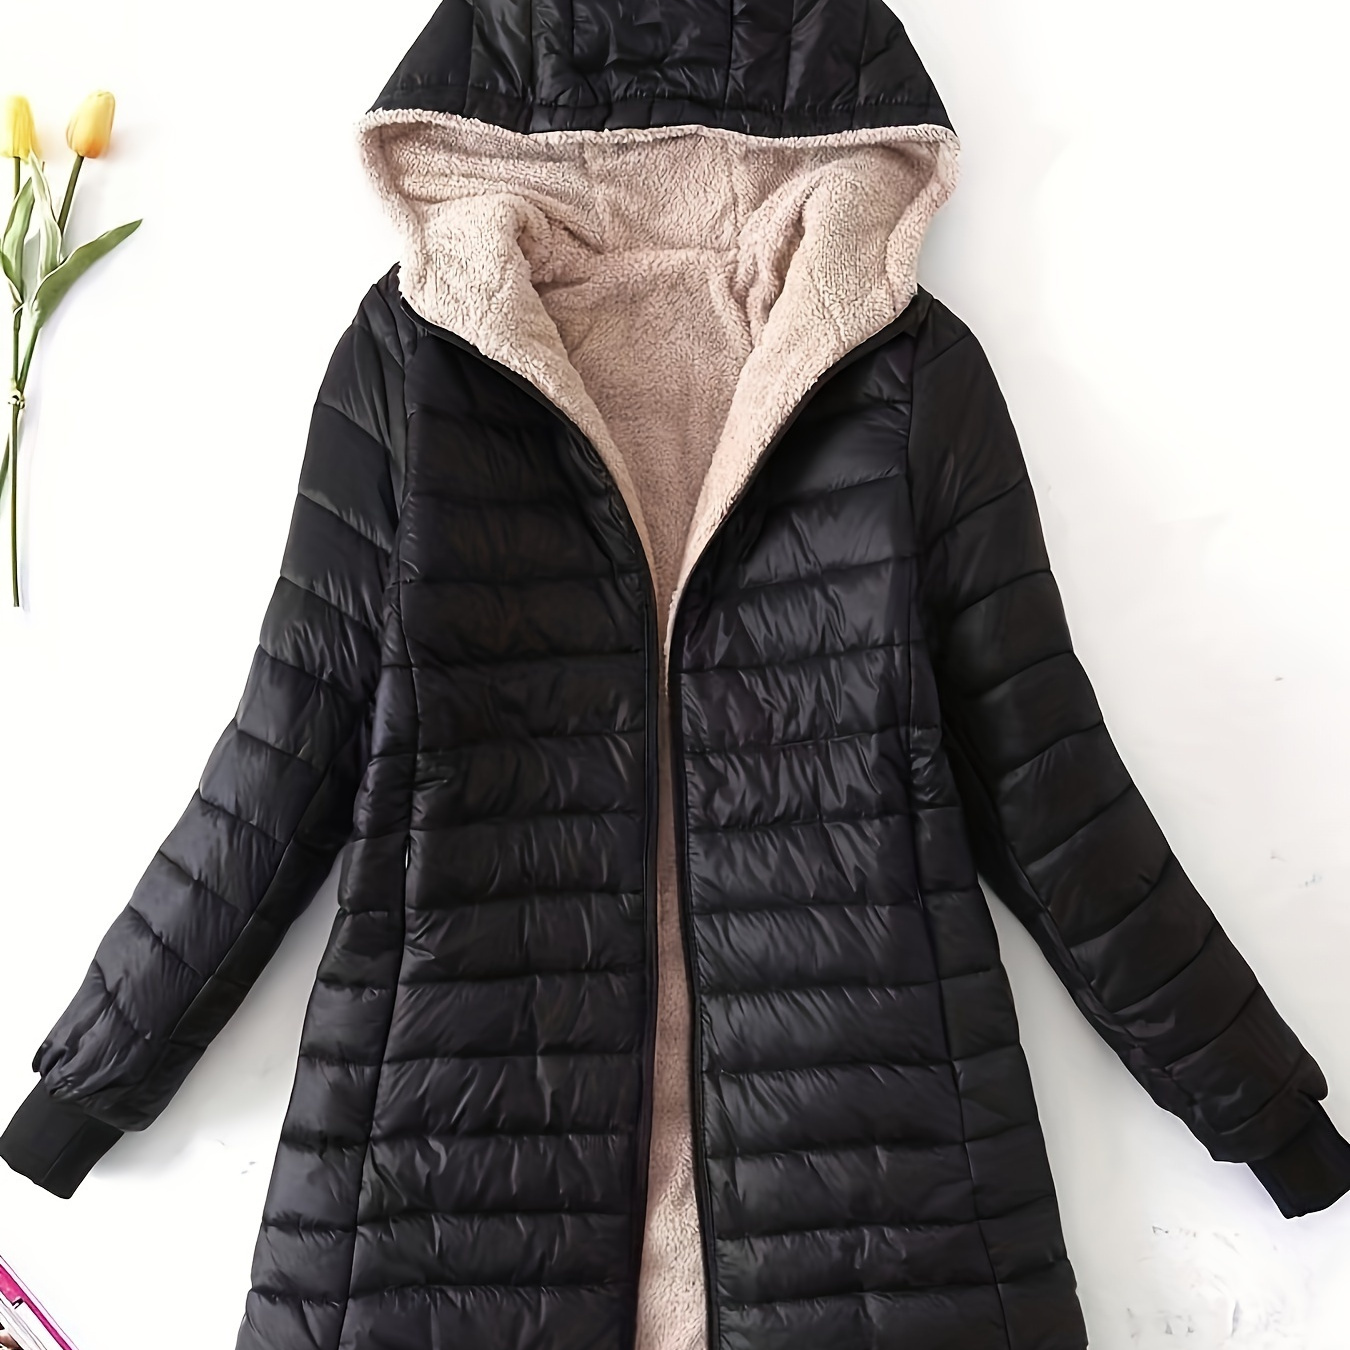 

Zip-up Puffy Hoodie Coat, Casual Thermal Long Sleeve Coat For Fall & Winter, Women's Clothing